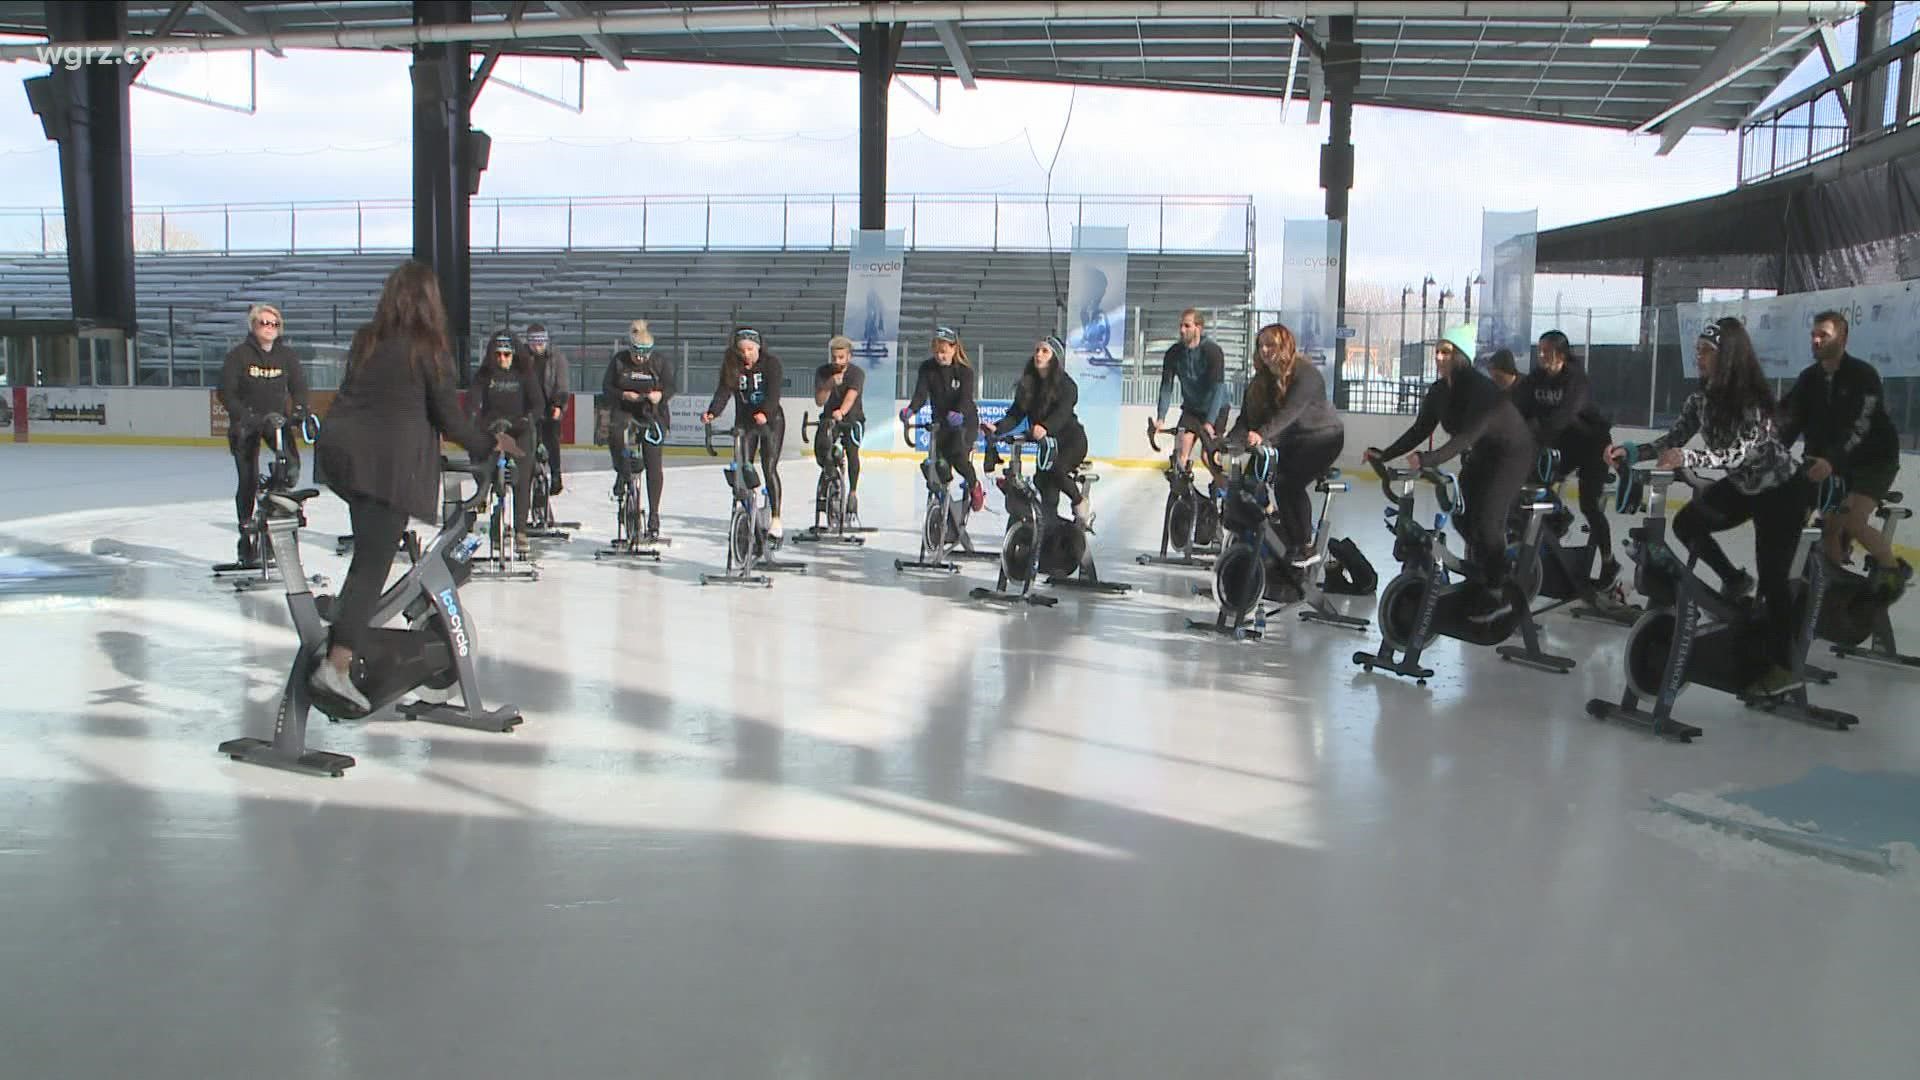 Cycling classes of hundreds of people will be on the ice at Riverworks... to raise money for Roswell.
13 local fitness studios will be a part of it..